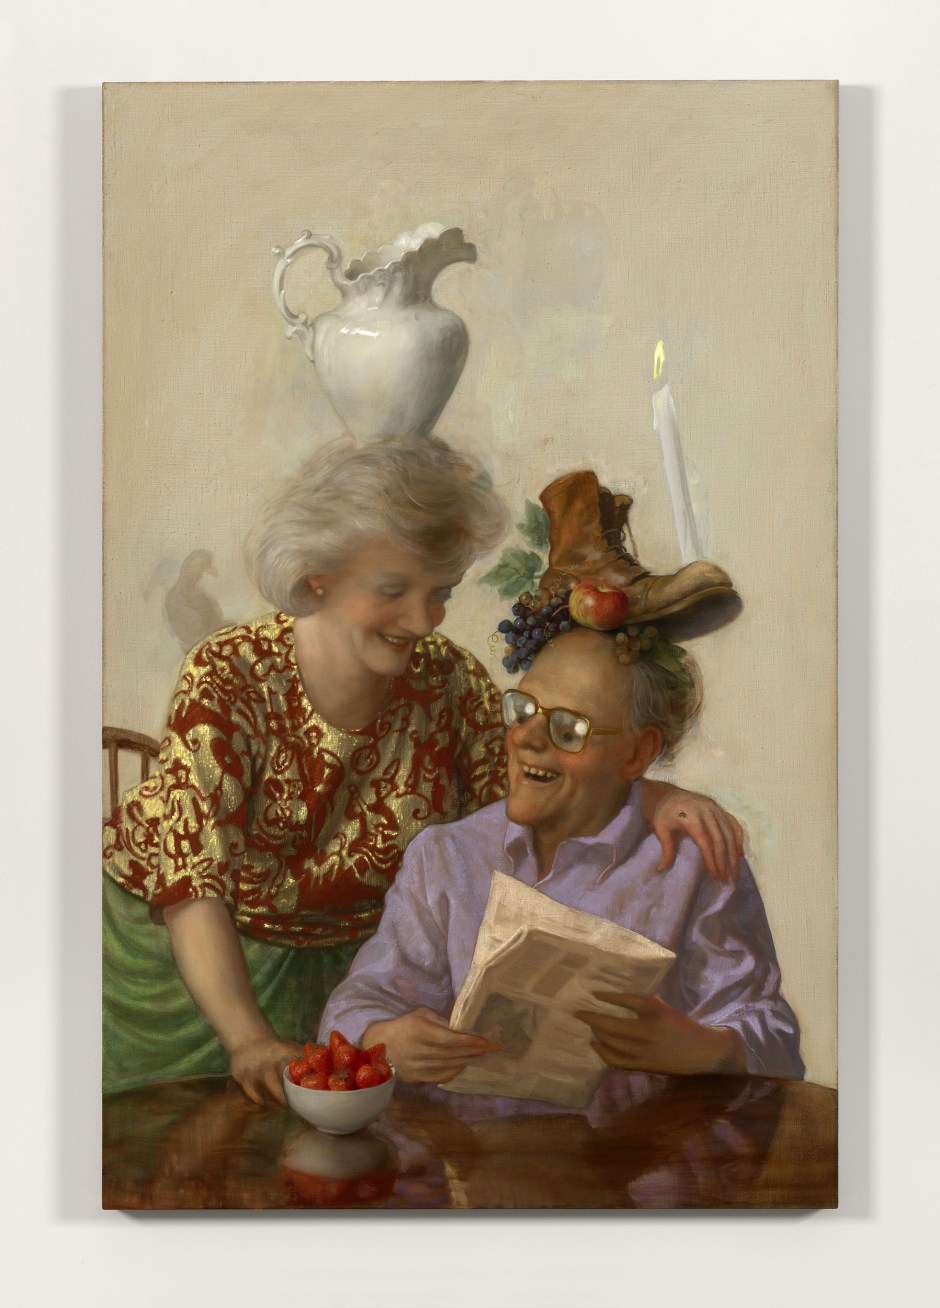 Newspaper Couple, 2016  oil on canvas  173.0 x 112.0 x 4.0 cm 68 x 44 x 1 1/2 in.